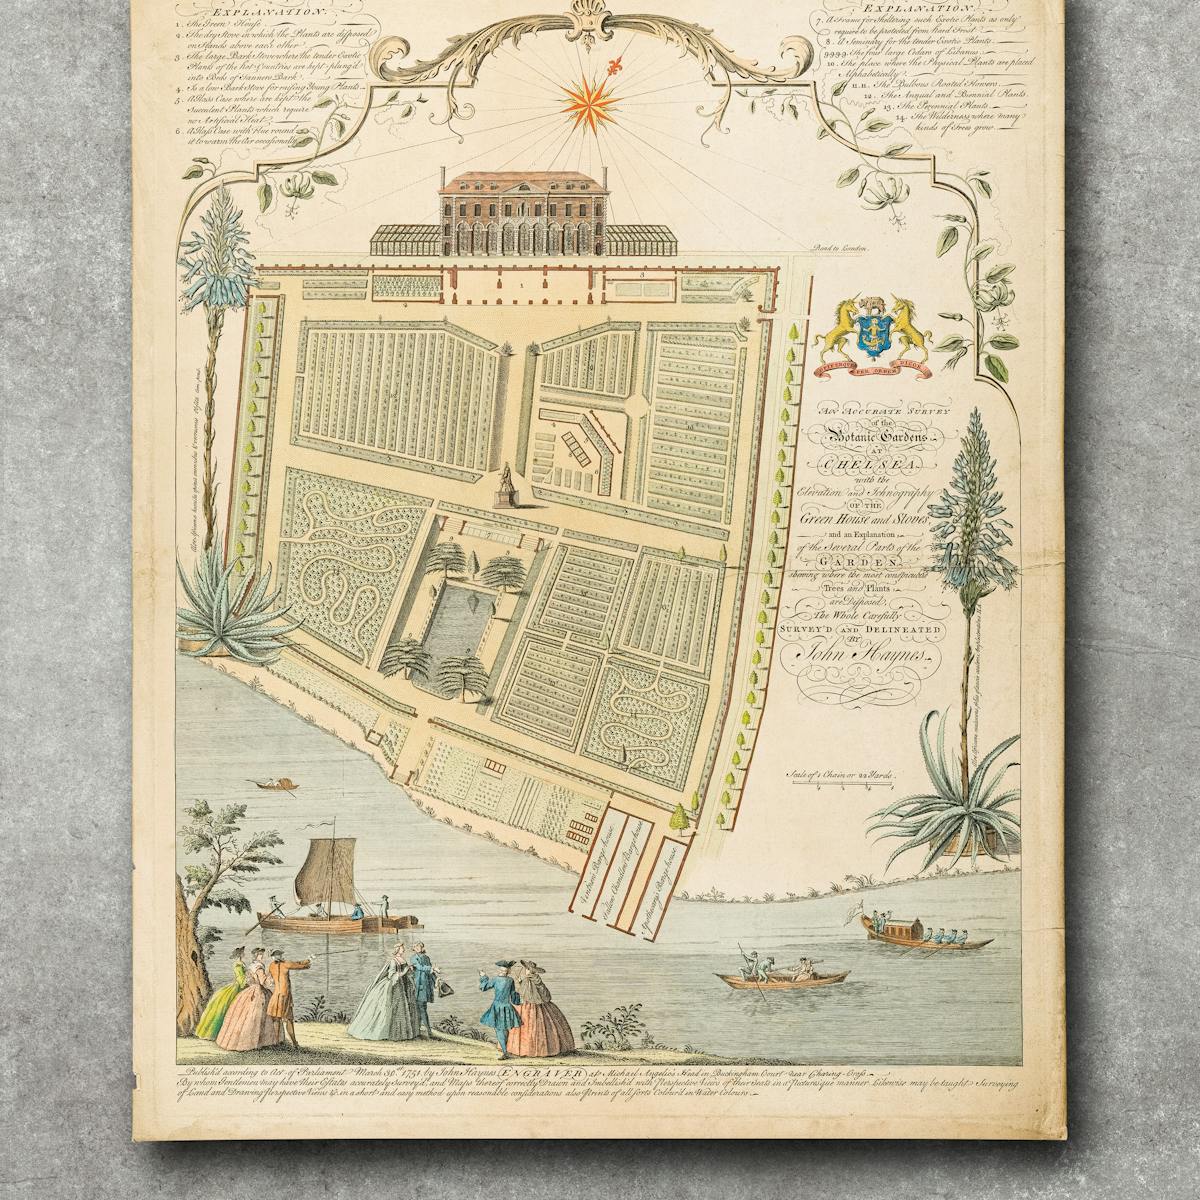 Image of a decorative, colour illustration showing plans for a formal-looking physic garden, set in front of a grand house. The illustration is pictured slightly raised against a grey concrete textured background.